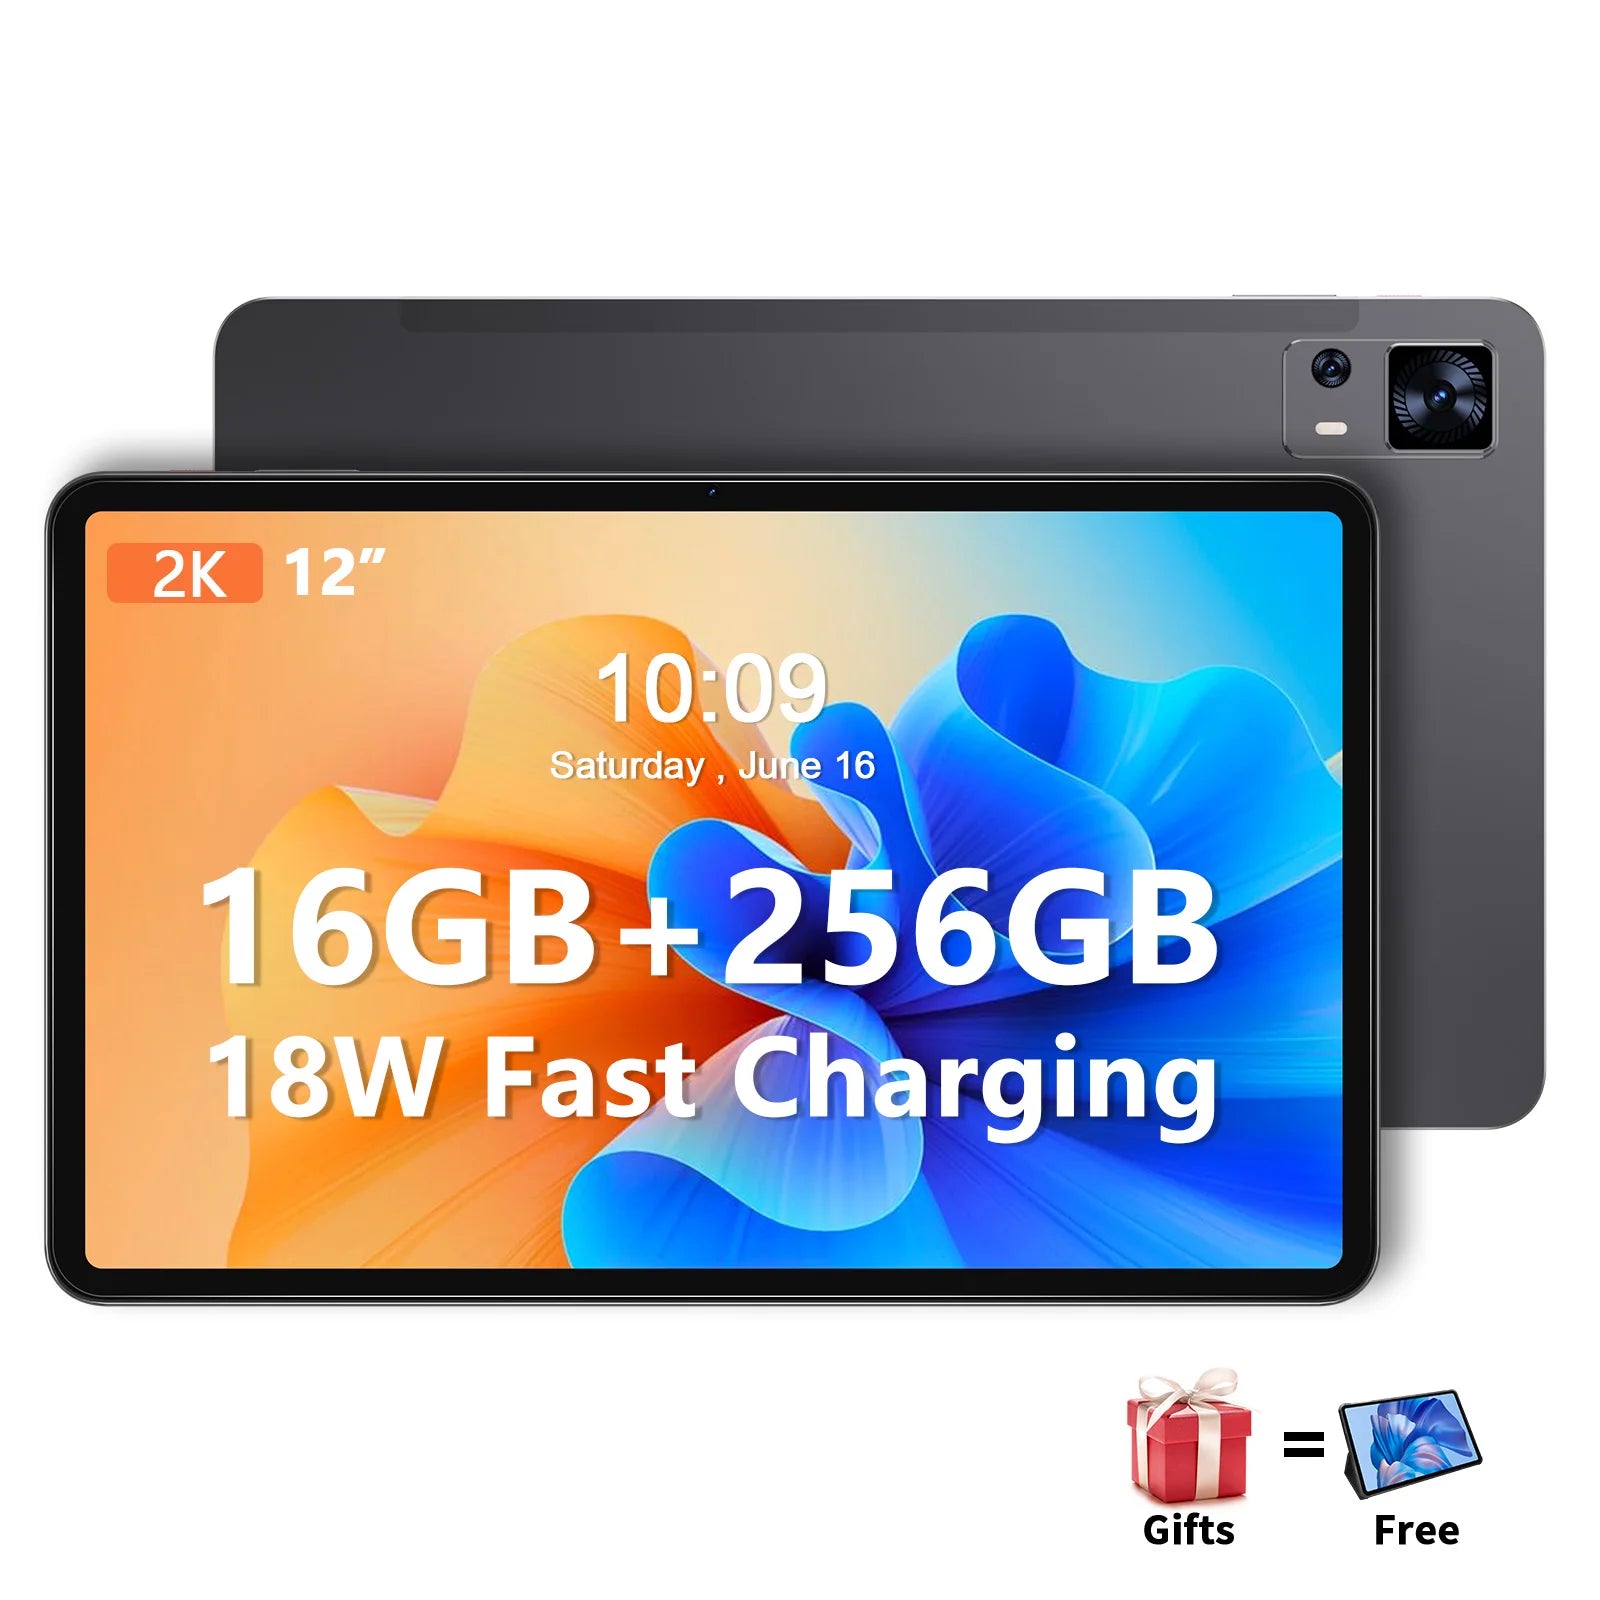 TAB16 12" 2K Tablet Android 13 2000x1200 FHD INCELL 16GB RAM 256GB ROM UNISOC T616 Octa Core 4G SIM 18W Fast Charging